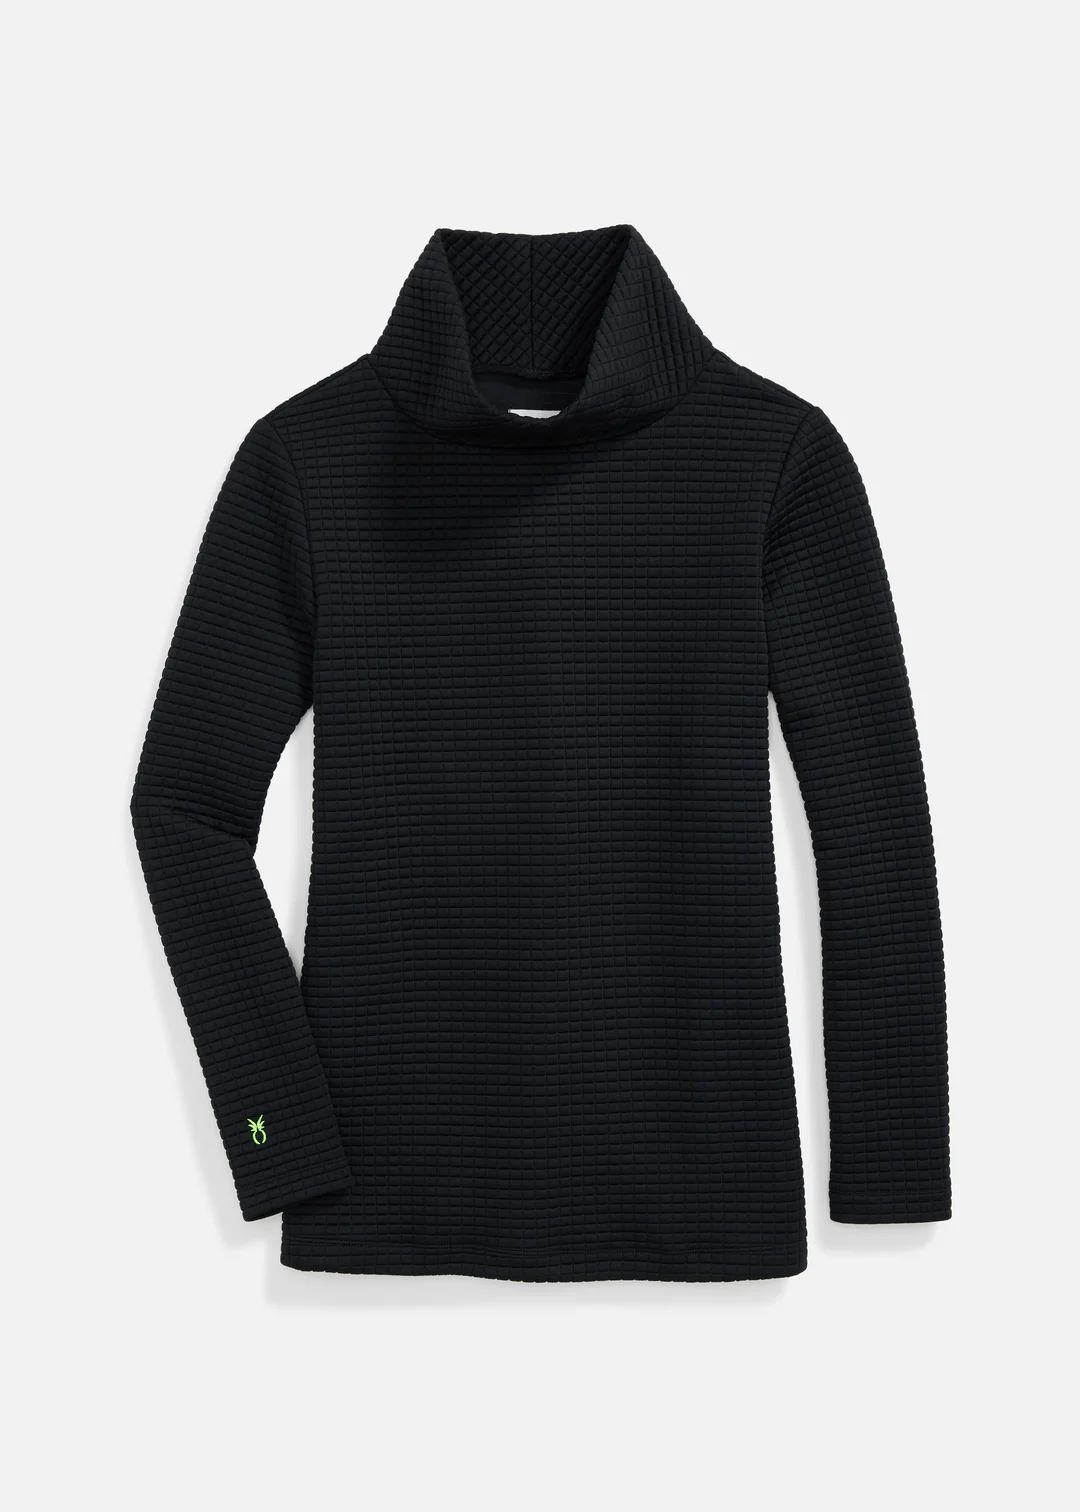 Cobble Hill Turtleneck in Waffle (Black) | Dudley Stephens